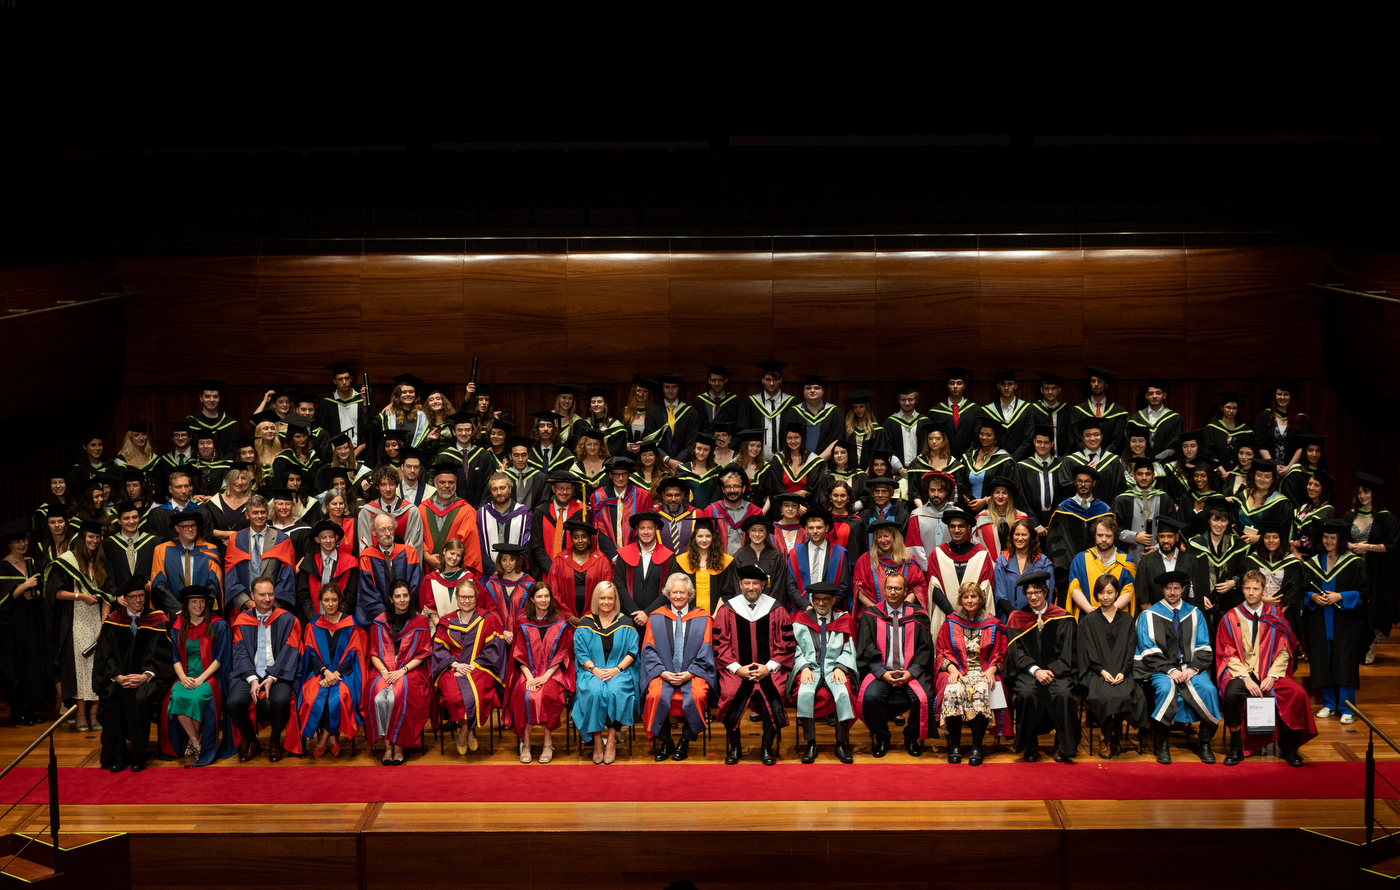 A large crowd poses for a picture at Northeastern London's commencement ceremony.